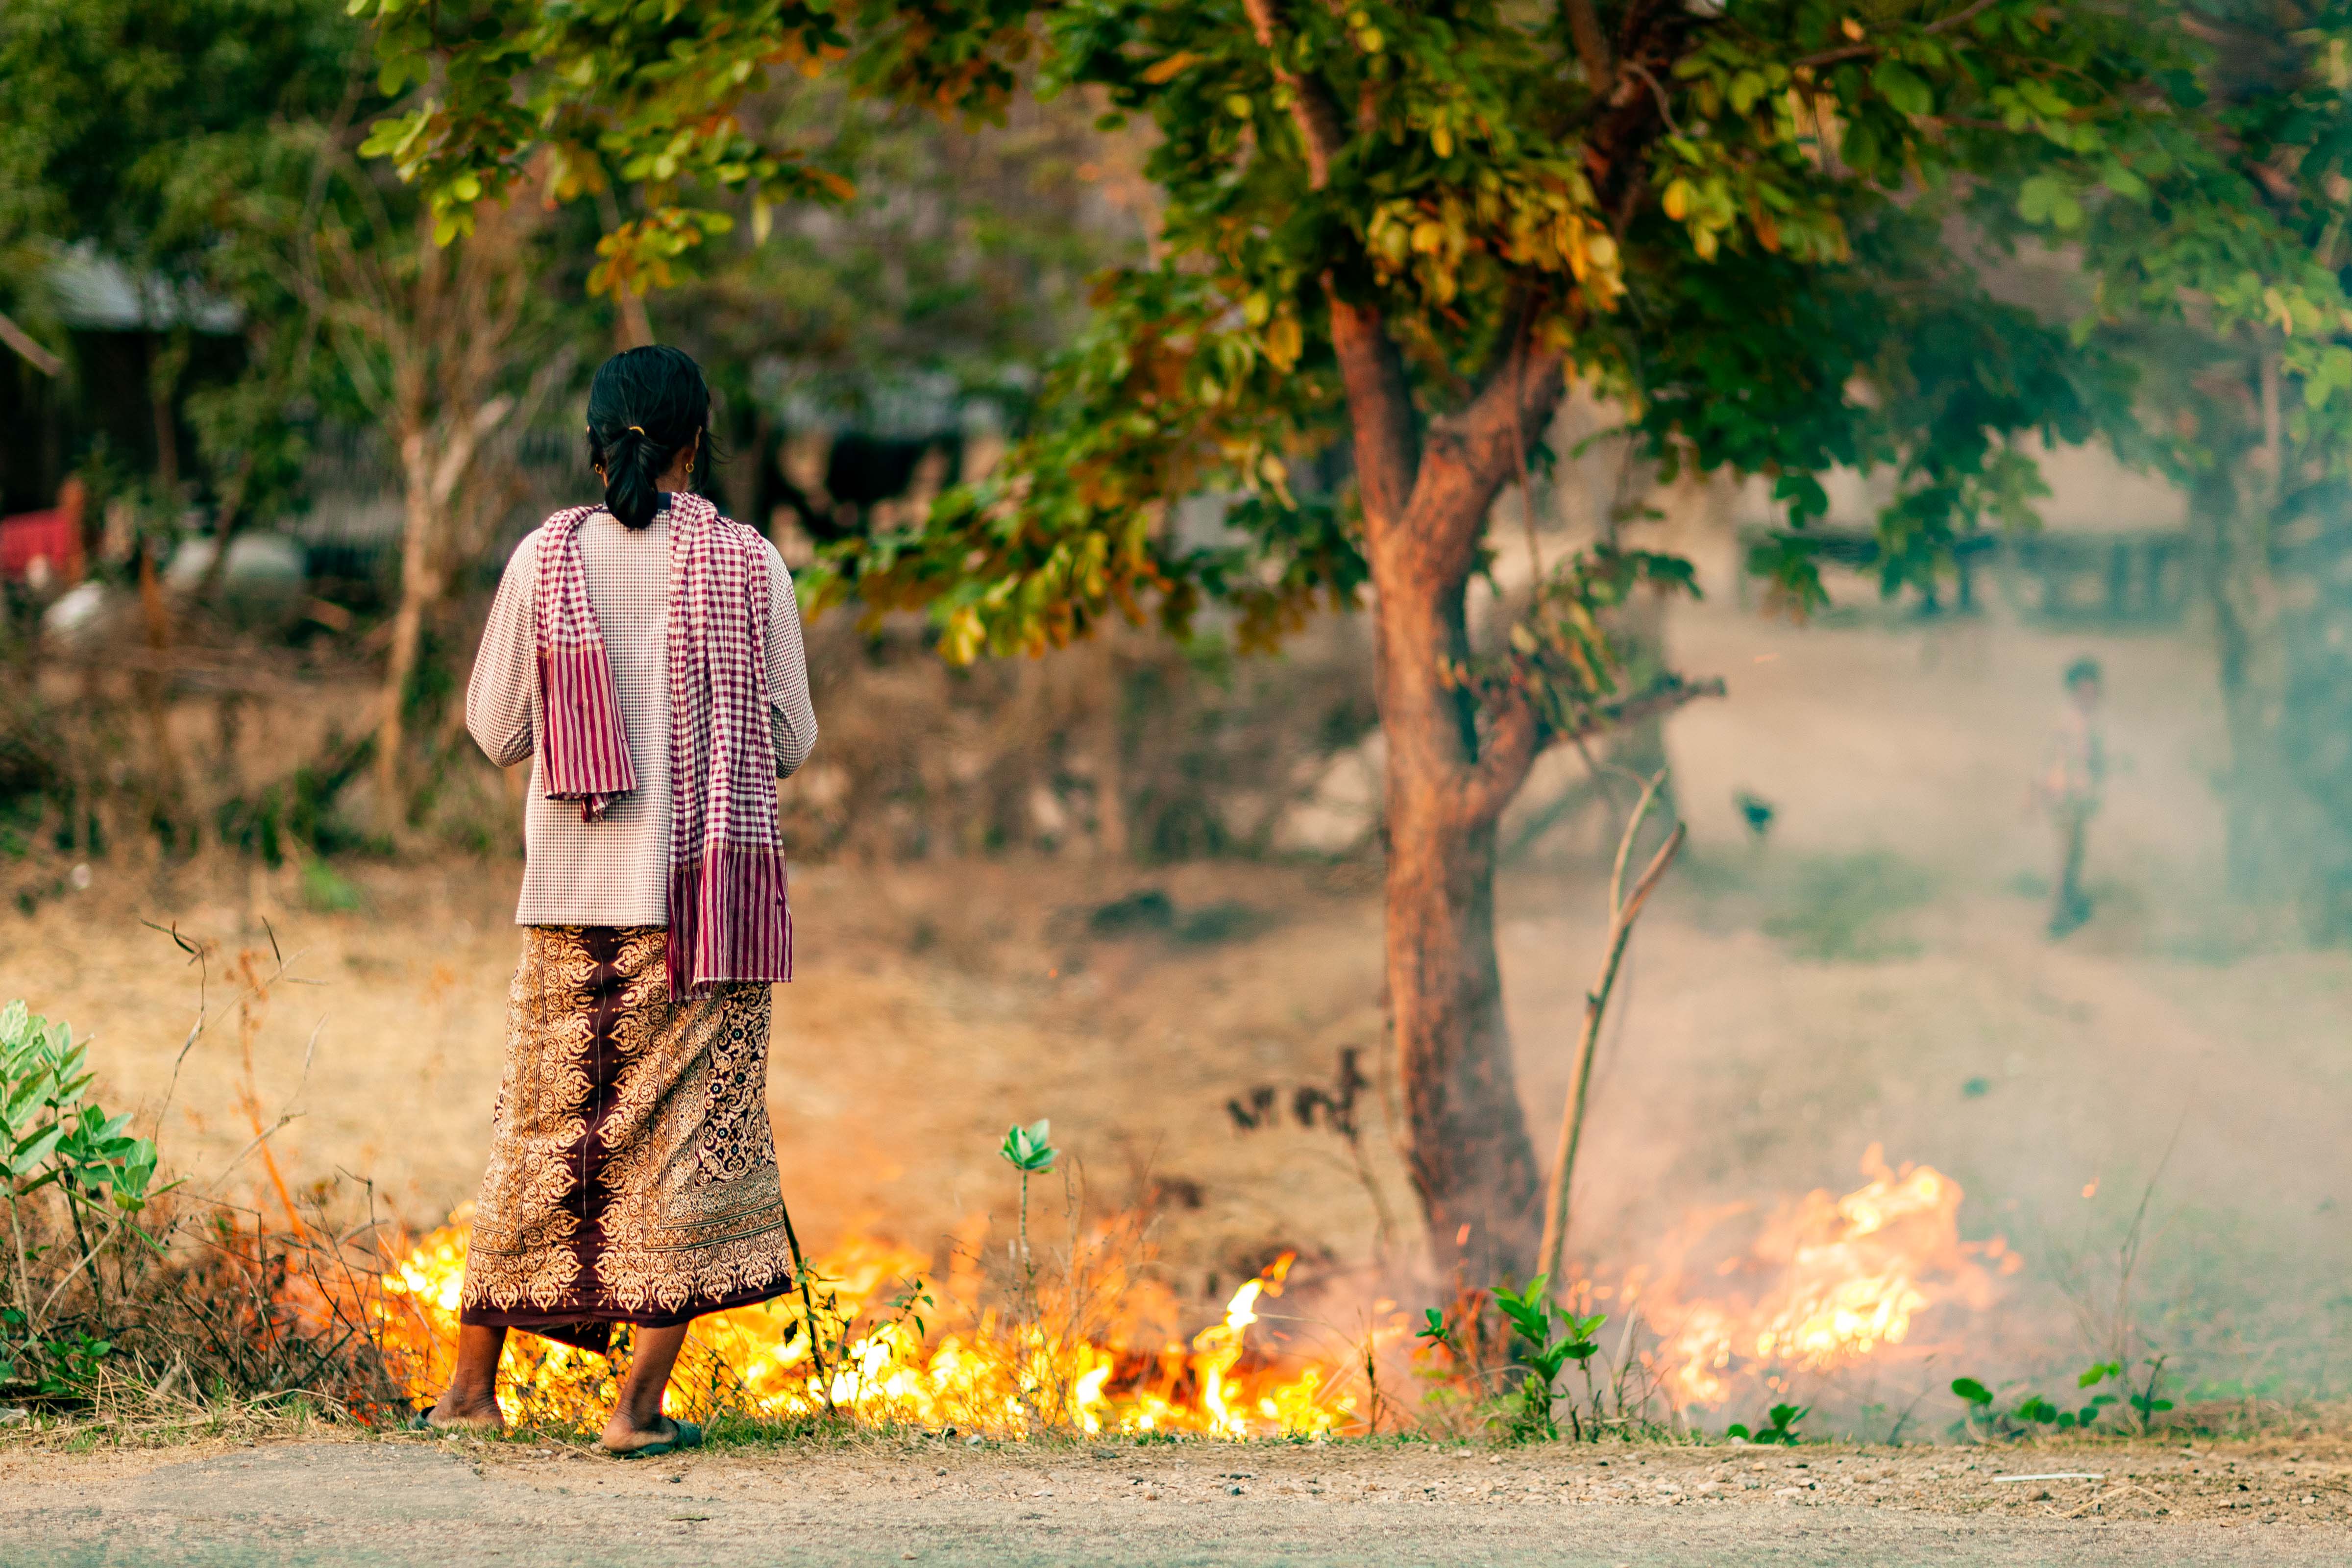 Cambodia, Pousaat Prov, Fire Tending, 2011, IMG 9611